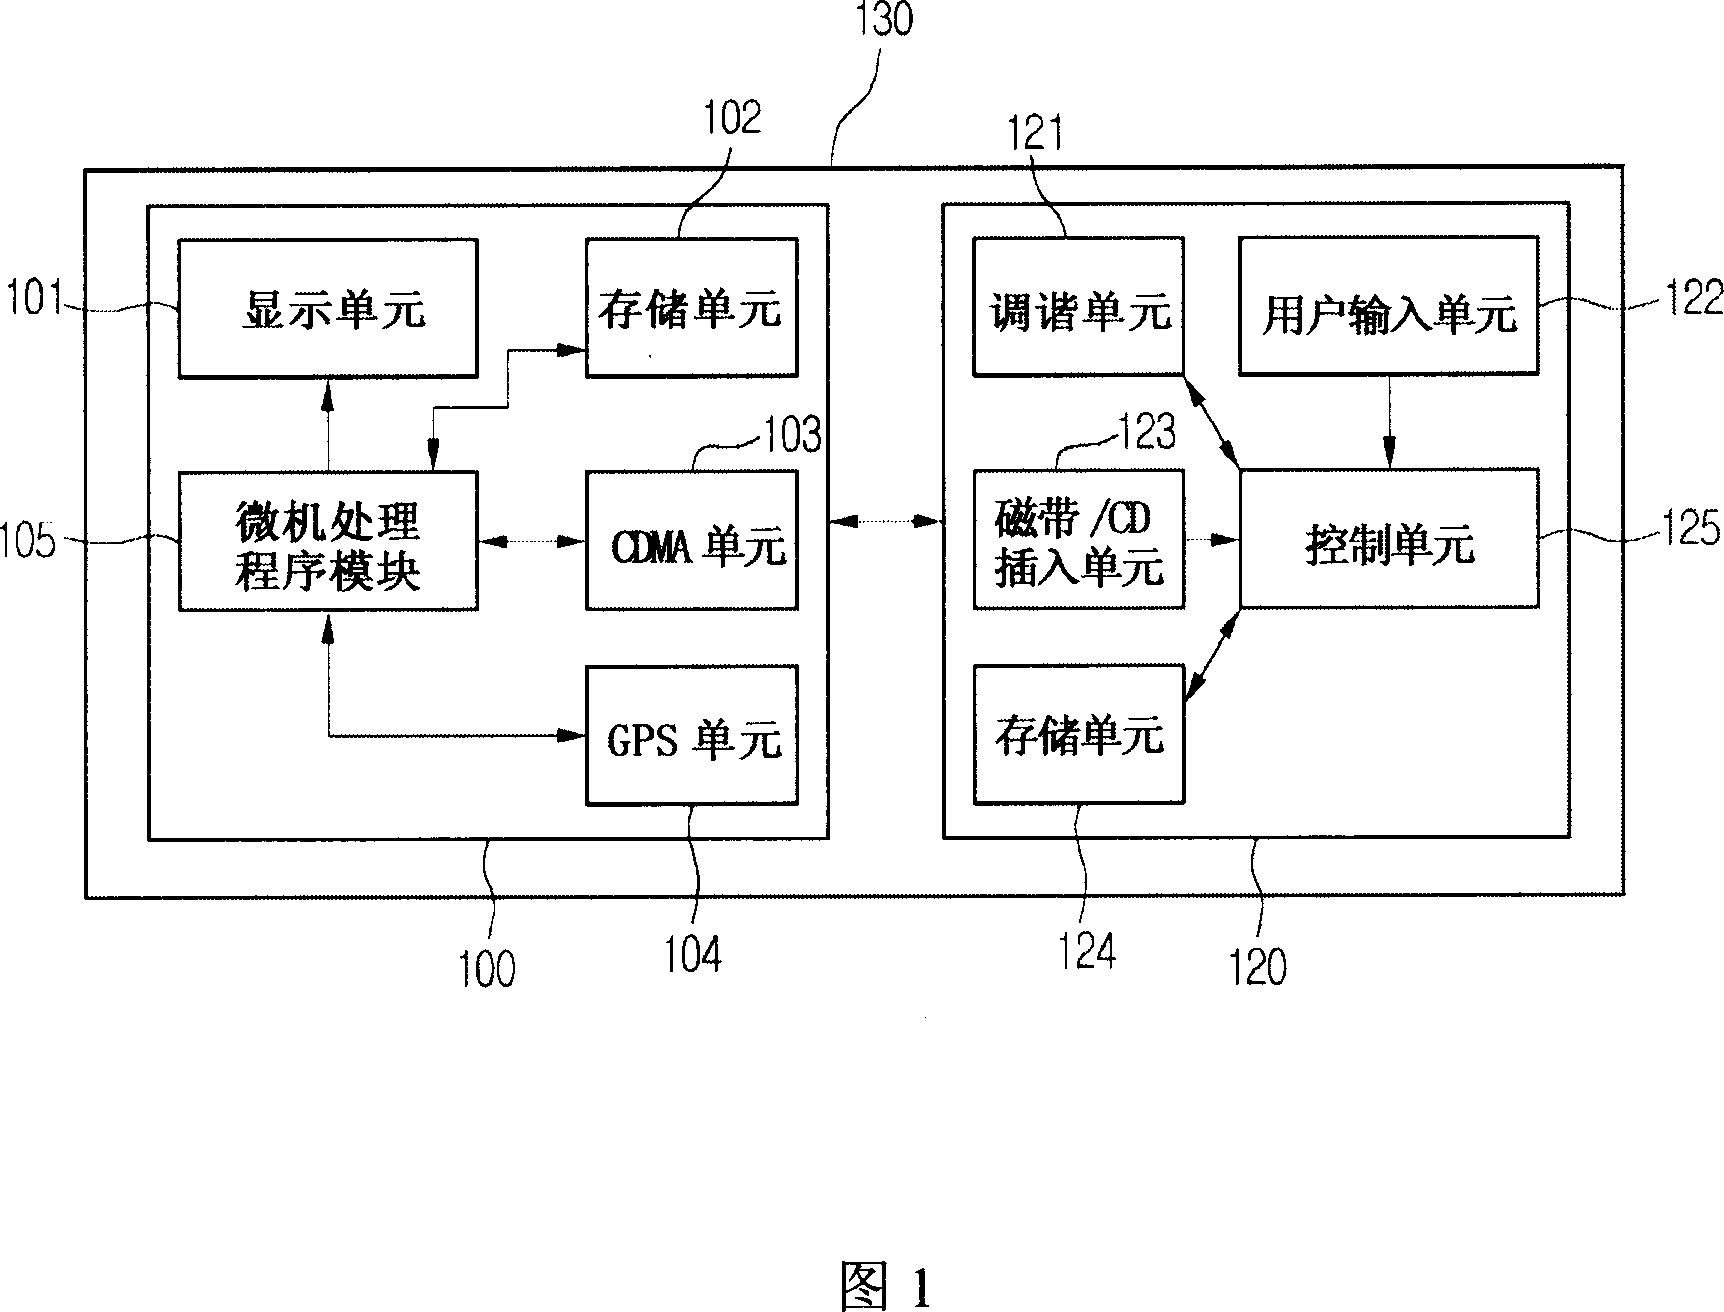 Remote information processing system and operating method thereof